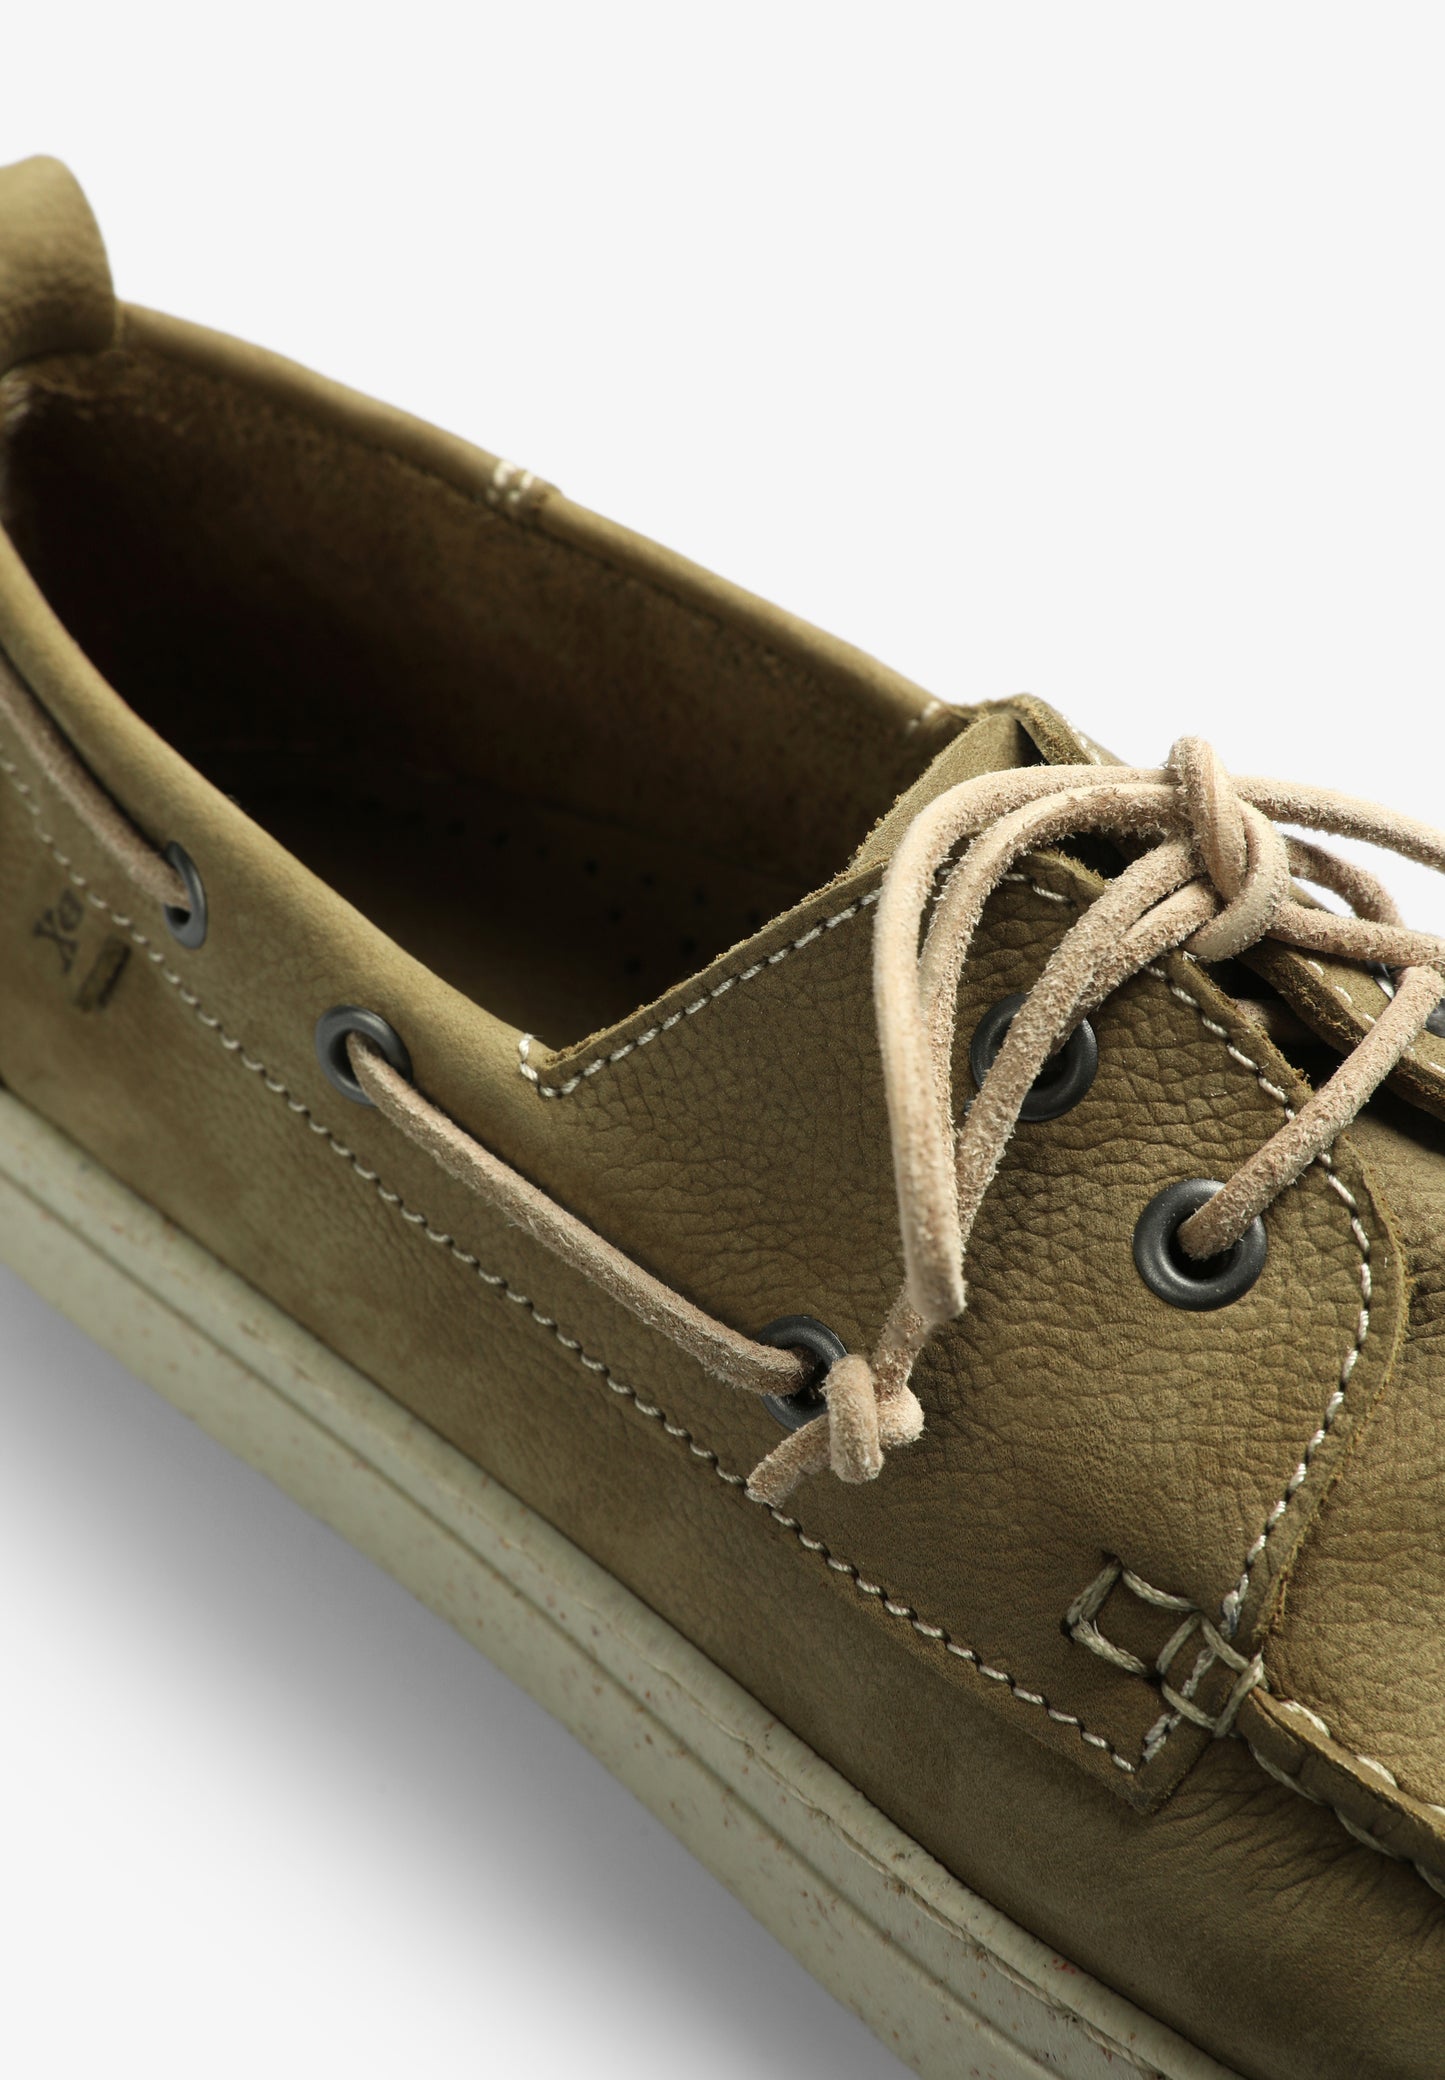 VILA RECYCLED BOAT SHOES